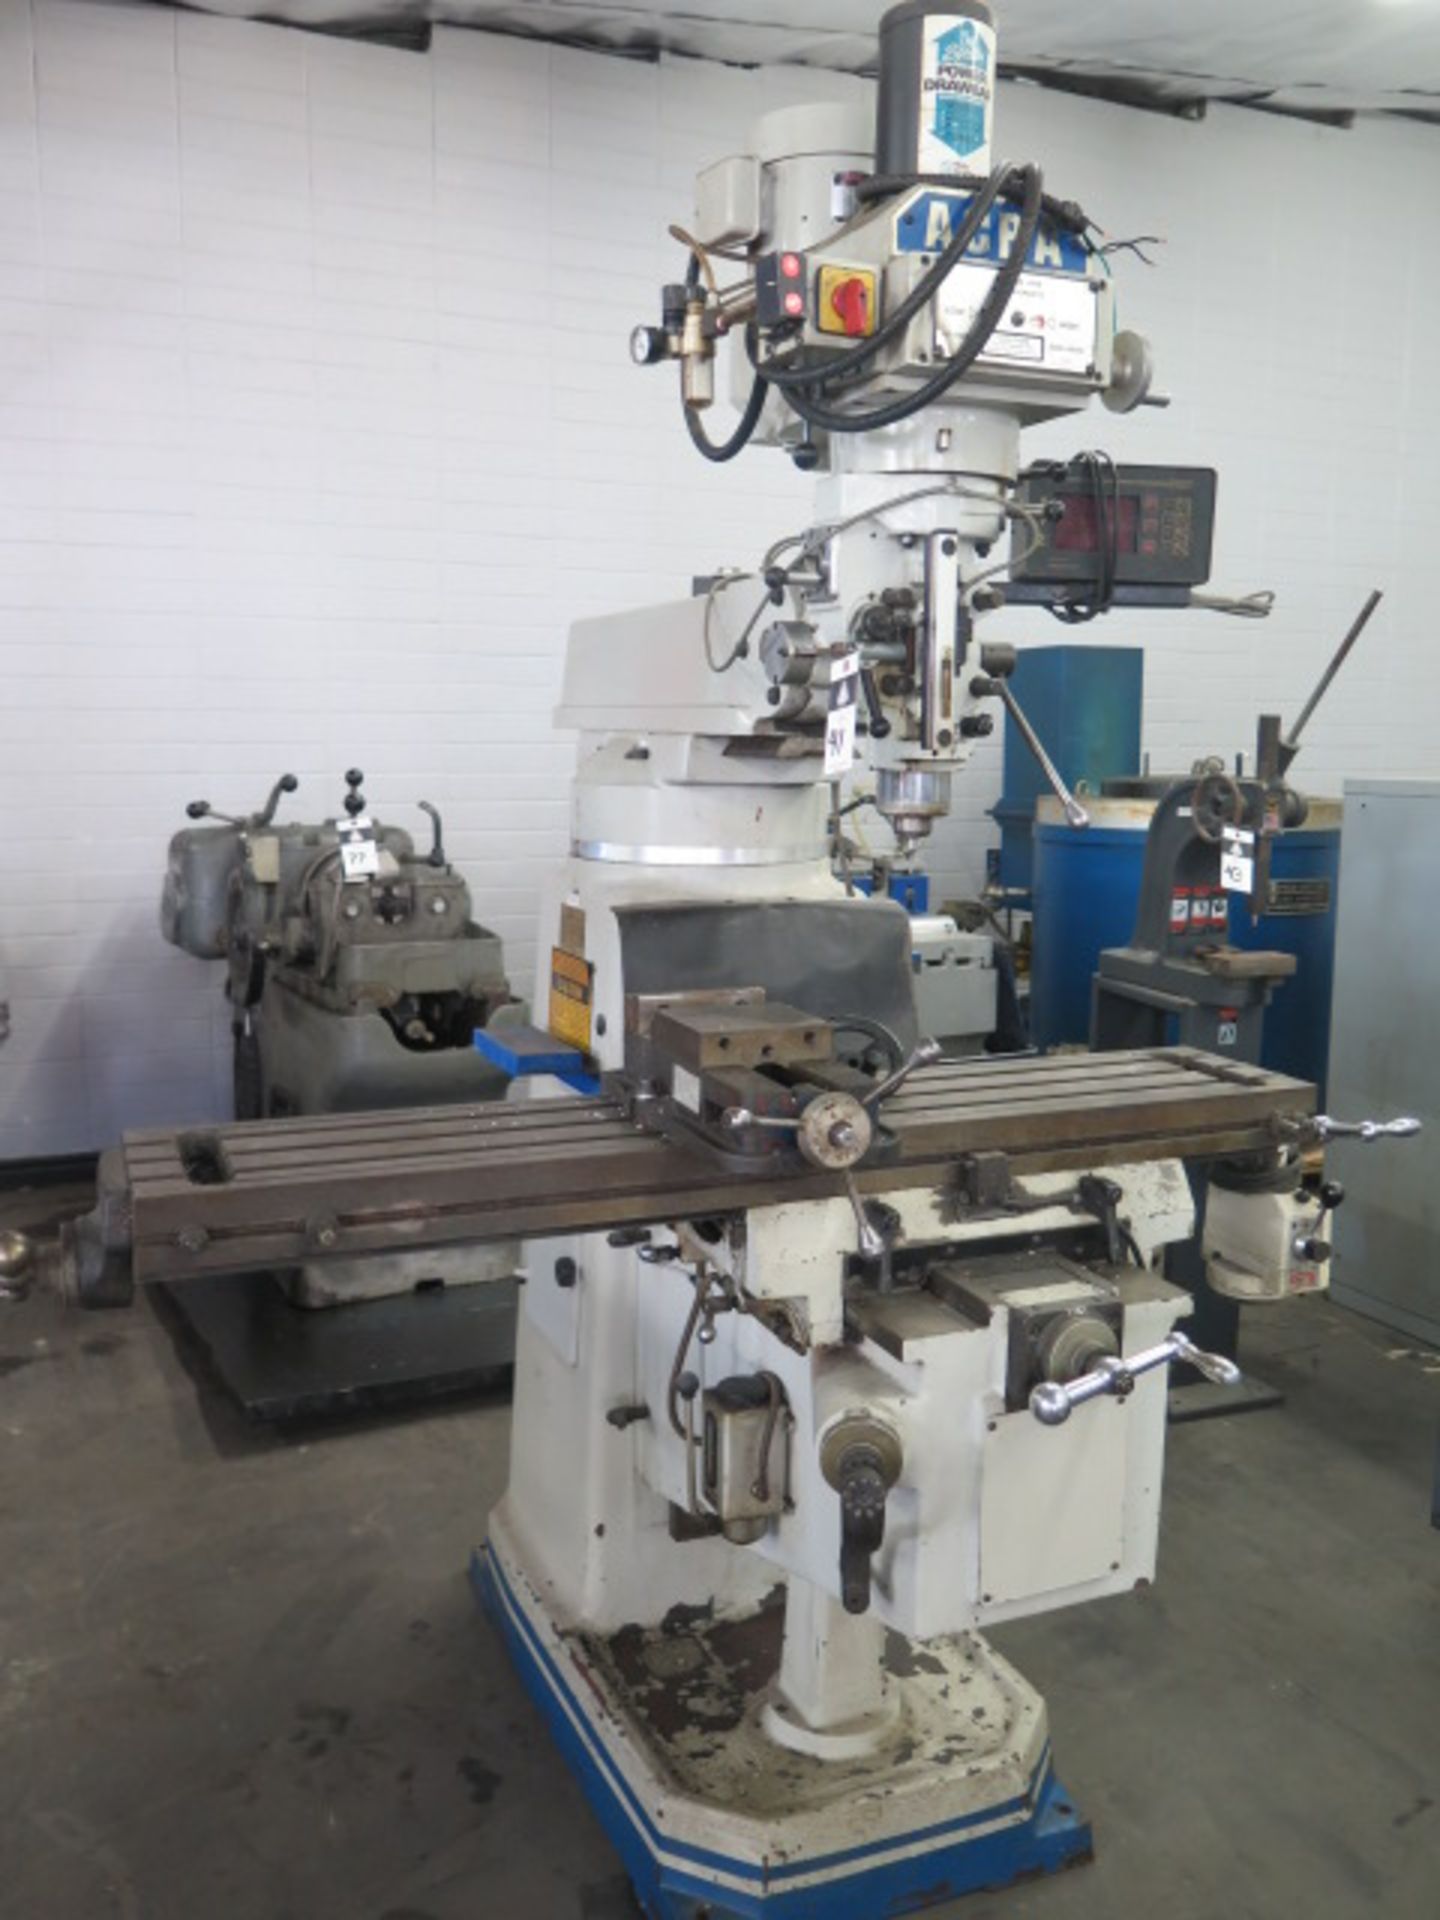 Acra AM-3 Vertical Mill s/n 961819 w/ Sargon 3-Axis DRO, 3Hp Motor, 60-4200 Dial RPM, Sold AS IS